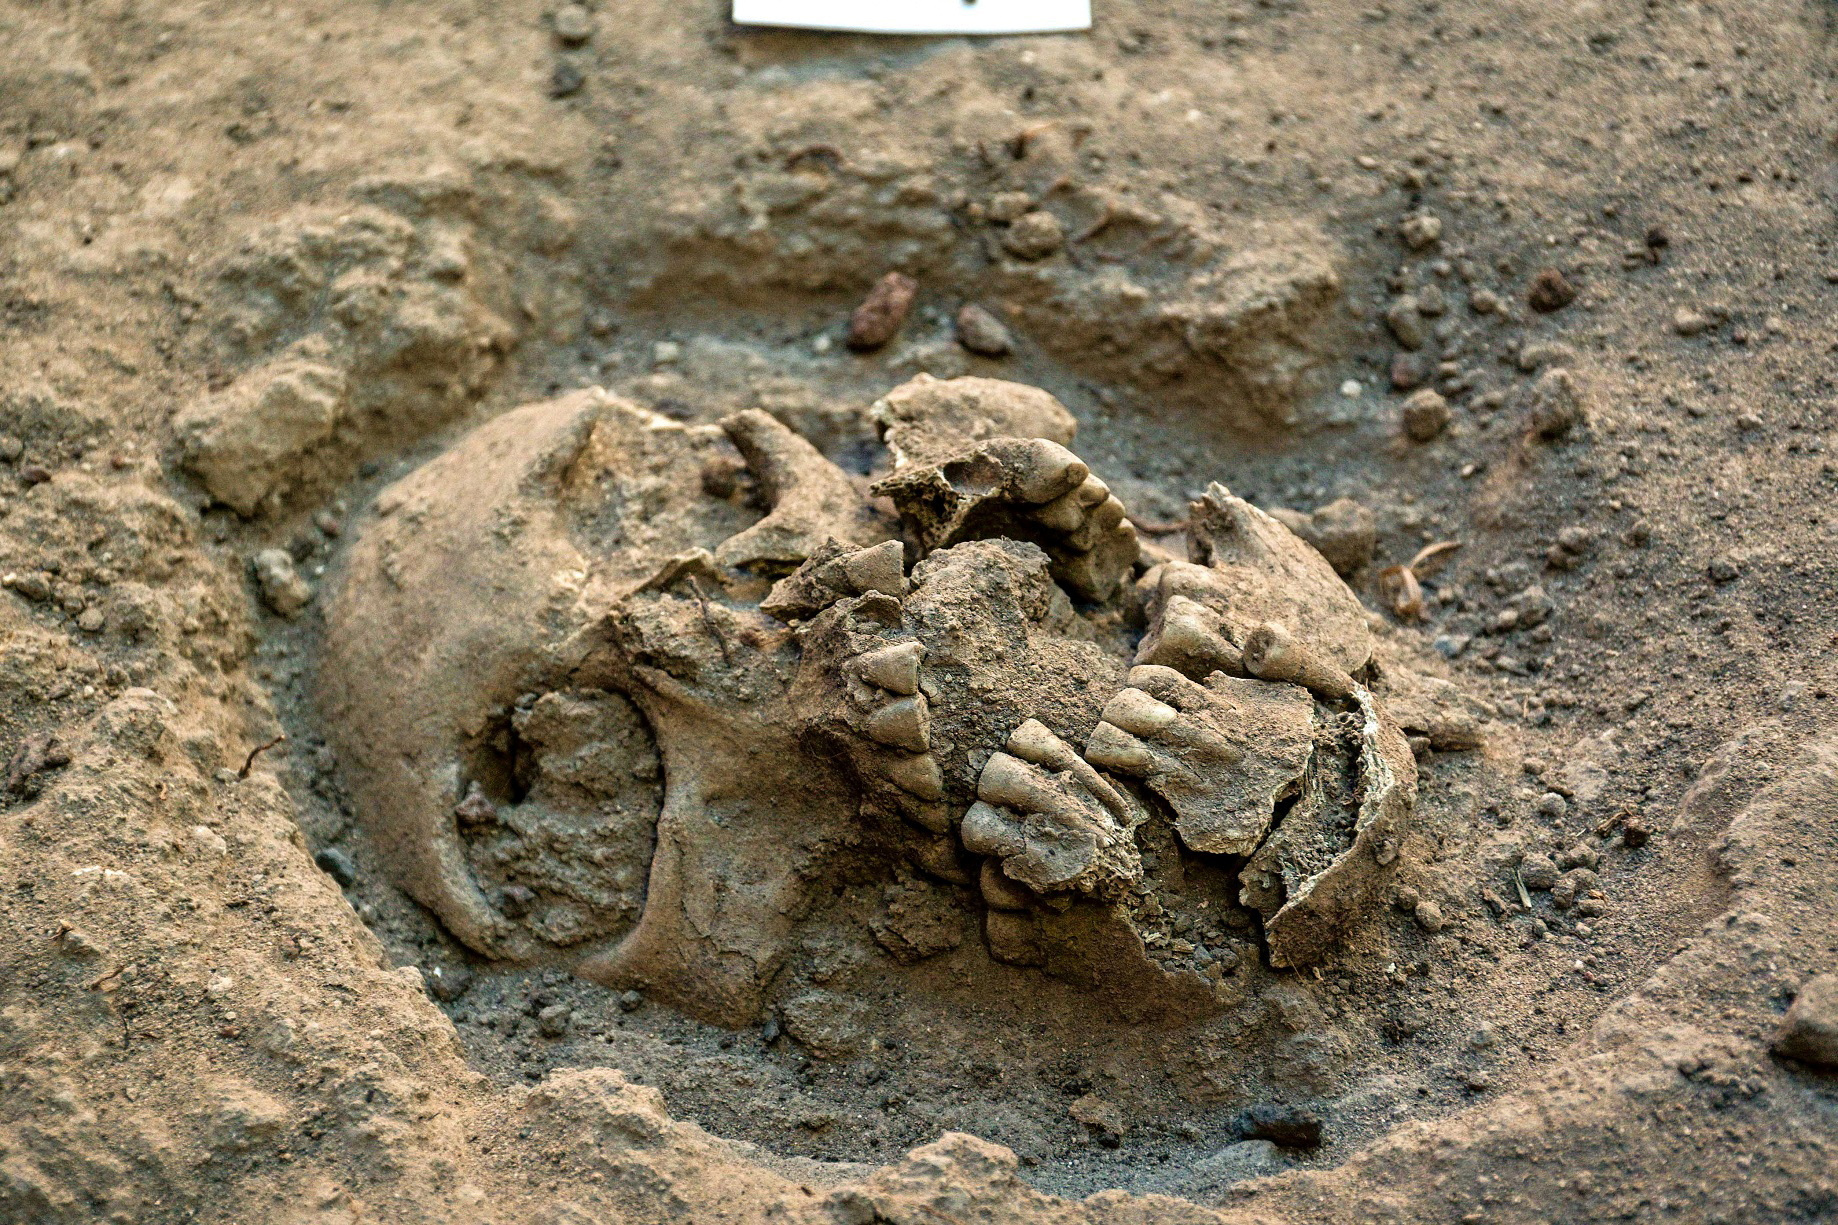 A view shows human remains discovered by archaeologists from INAH in Chapultepec park